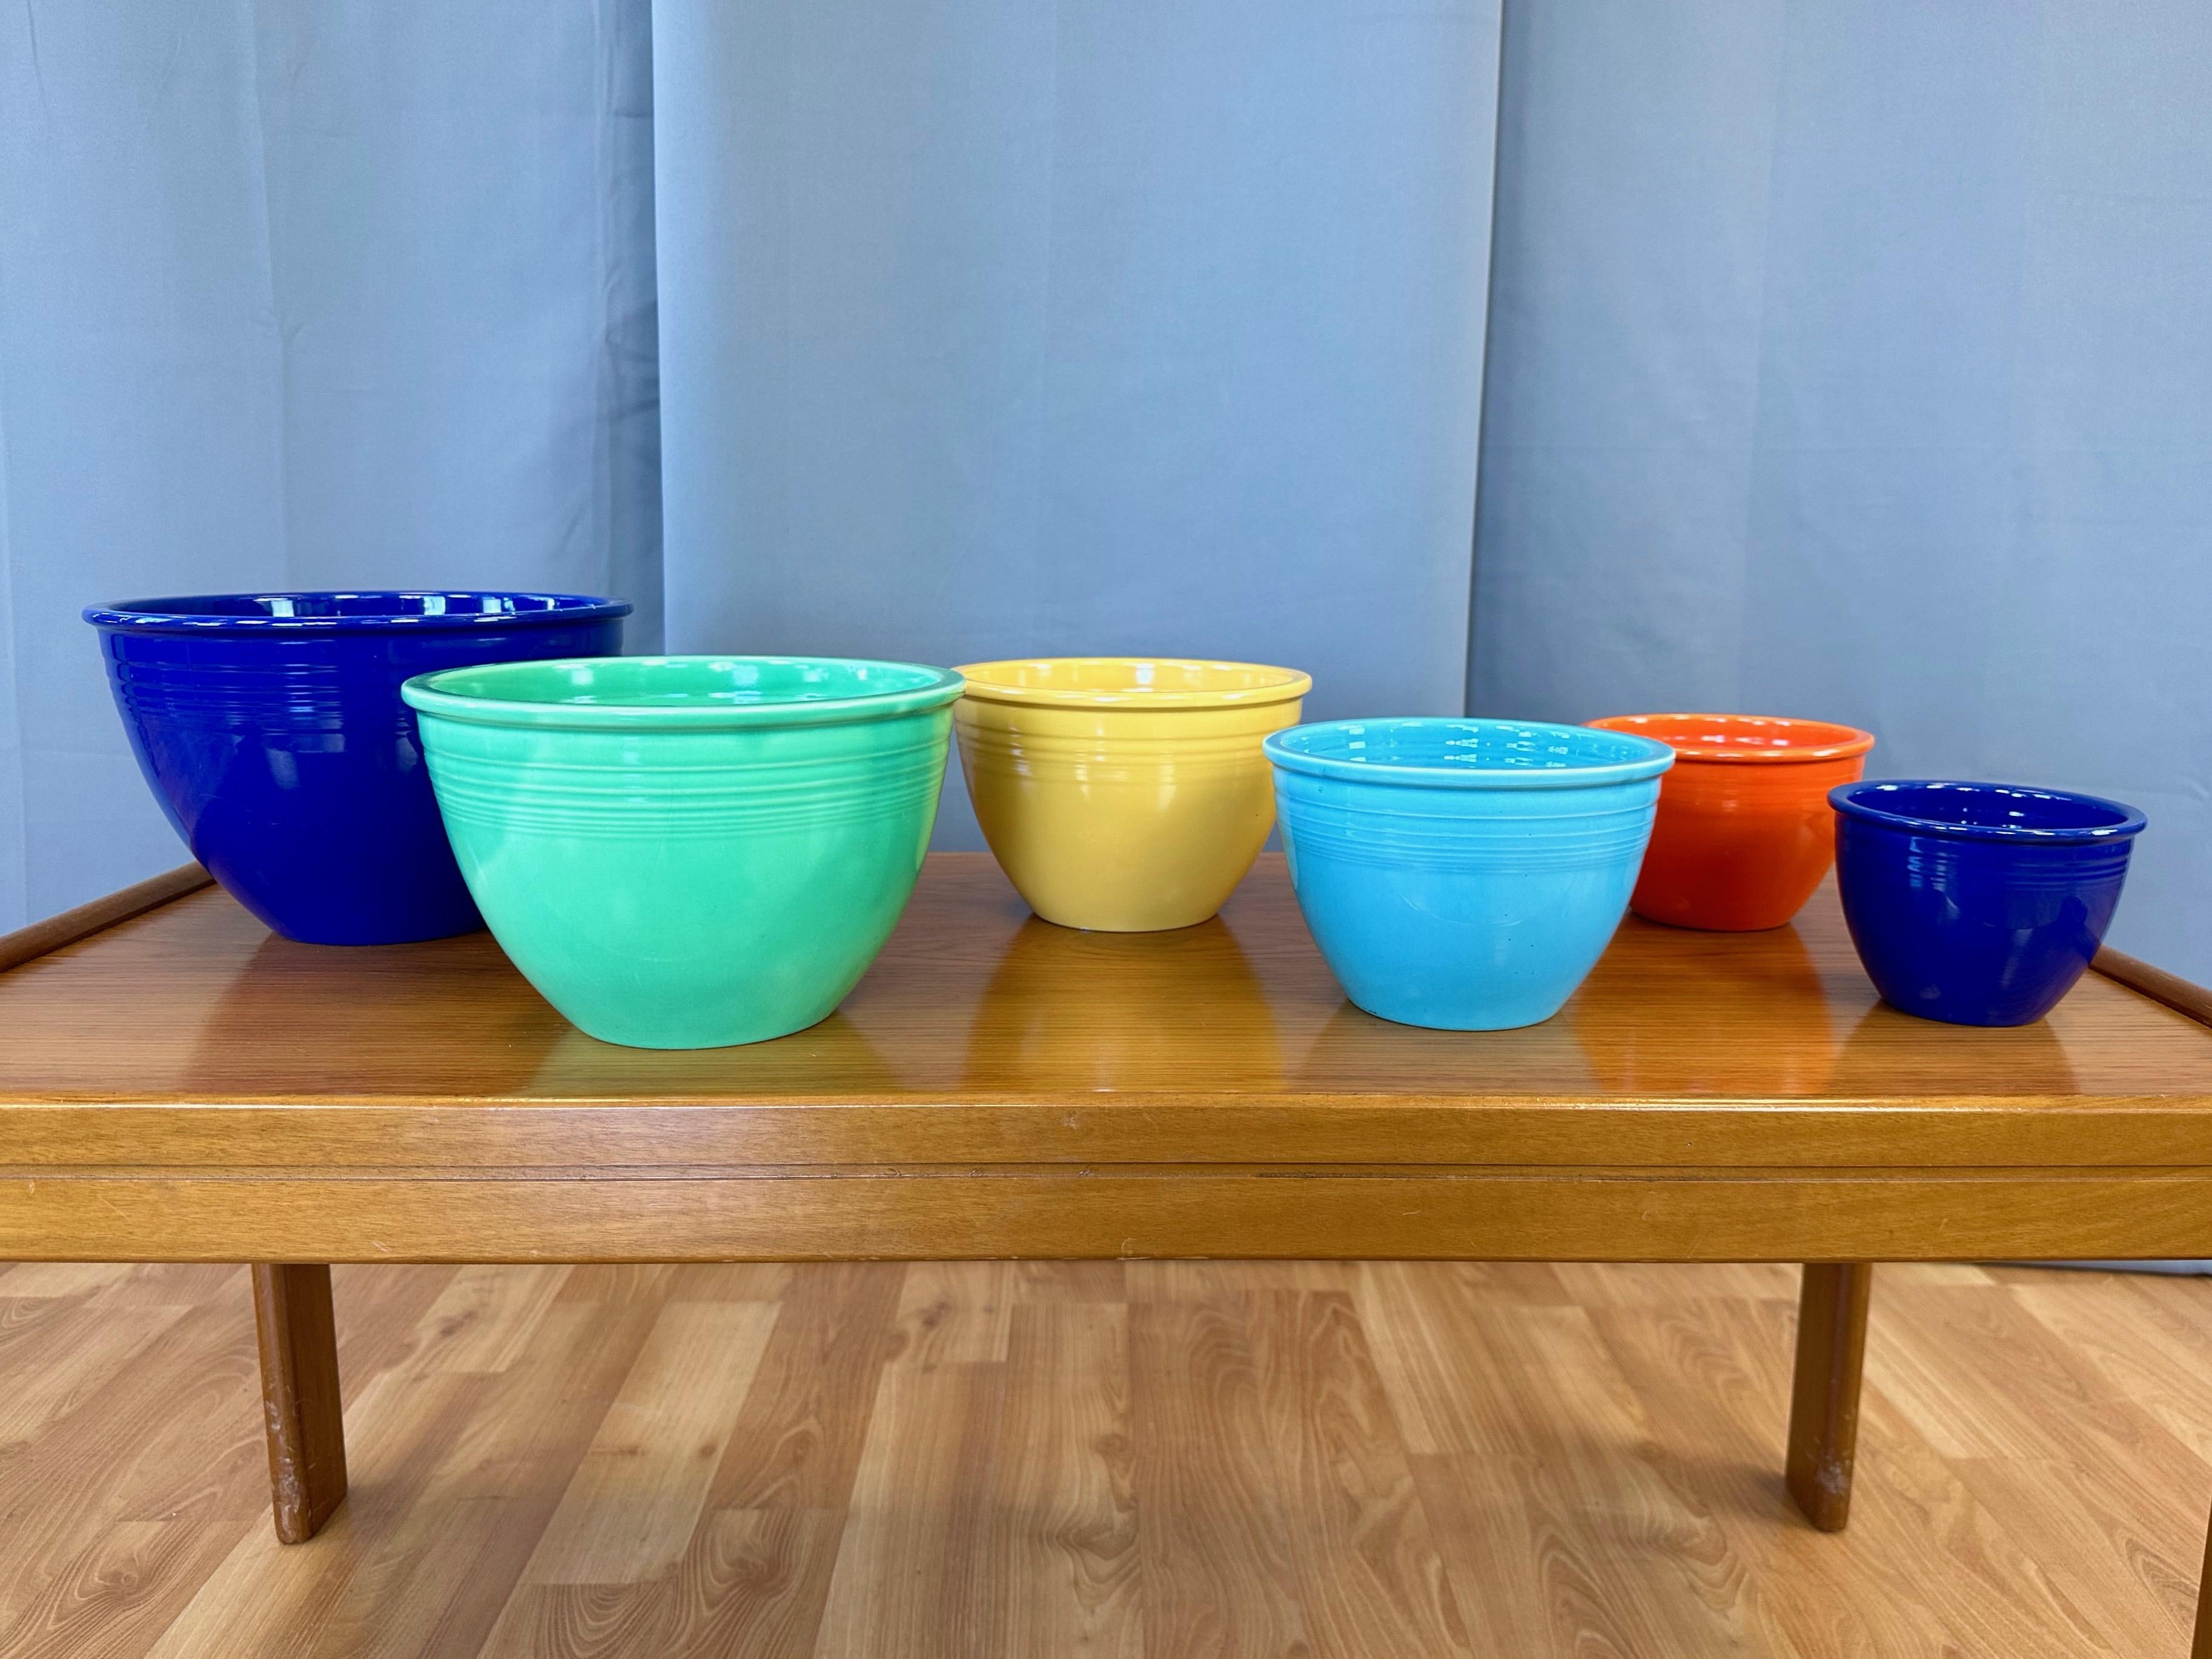 Art Deco Early Vintage Fiestaware Nesting Mixing Bowls, Multi-Color Set of Six, c. 1940